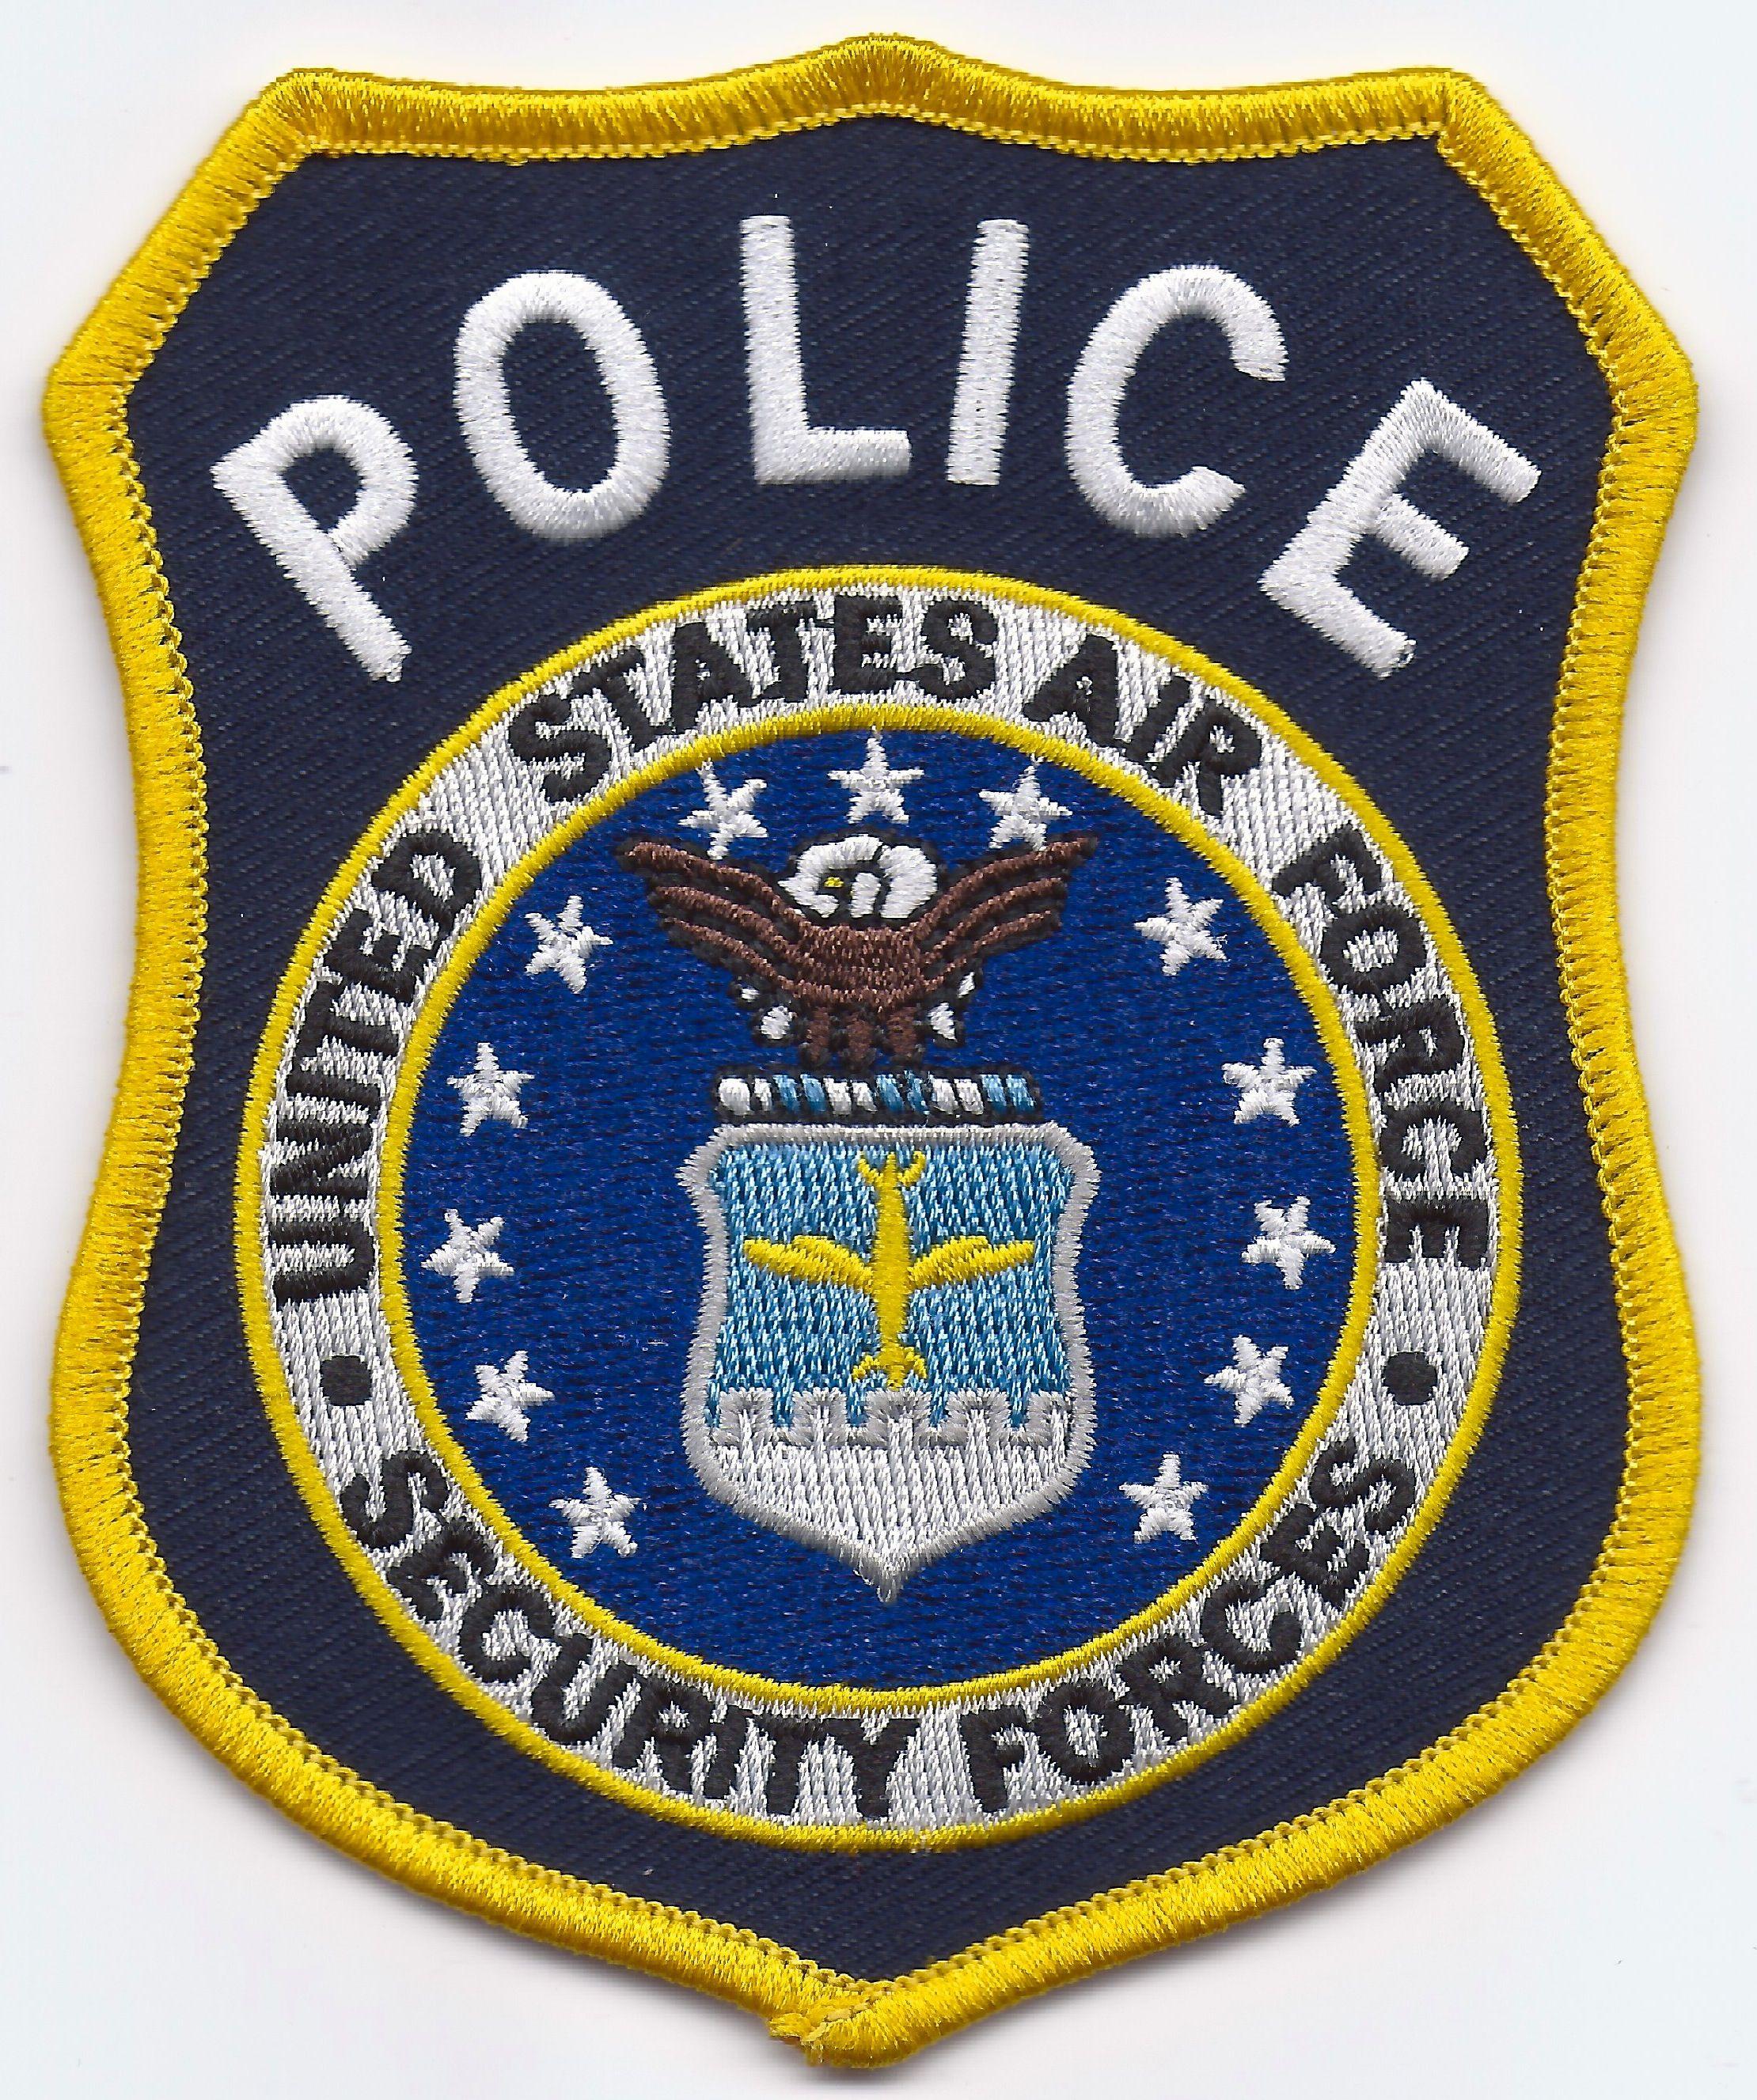 Air Force Security Forces Logo - United States Air Force Security Forces Police Patch.jpeg